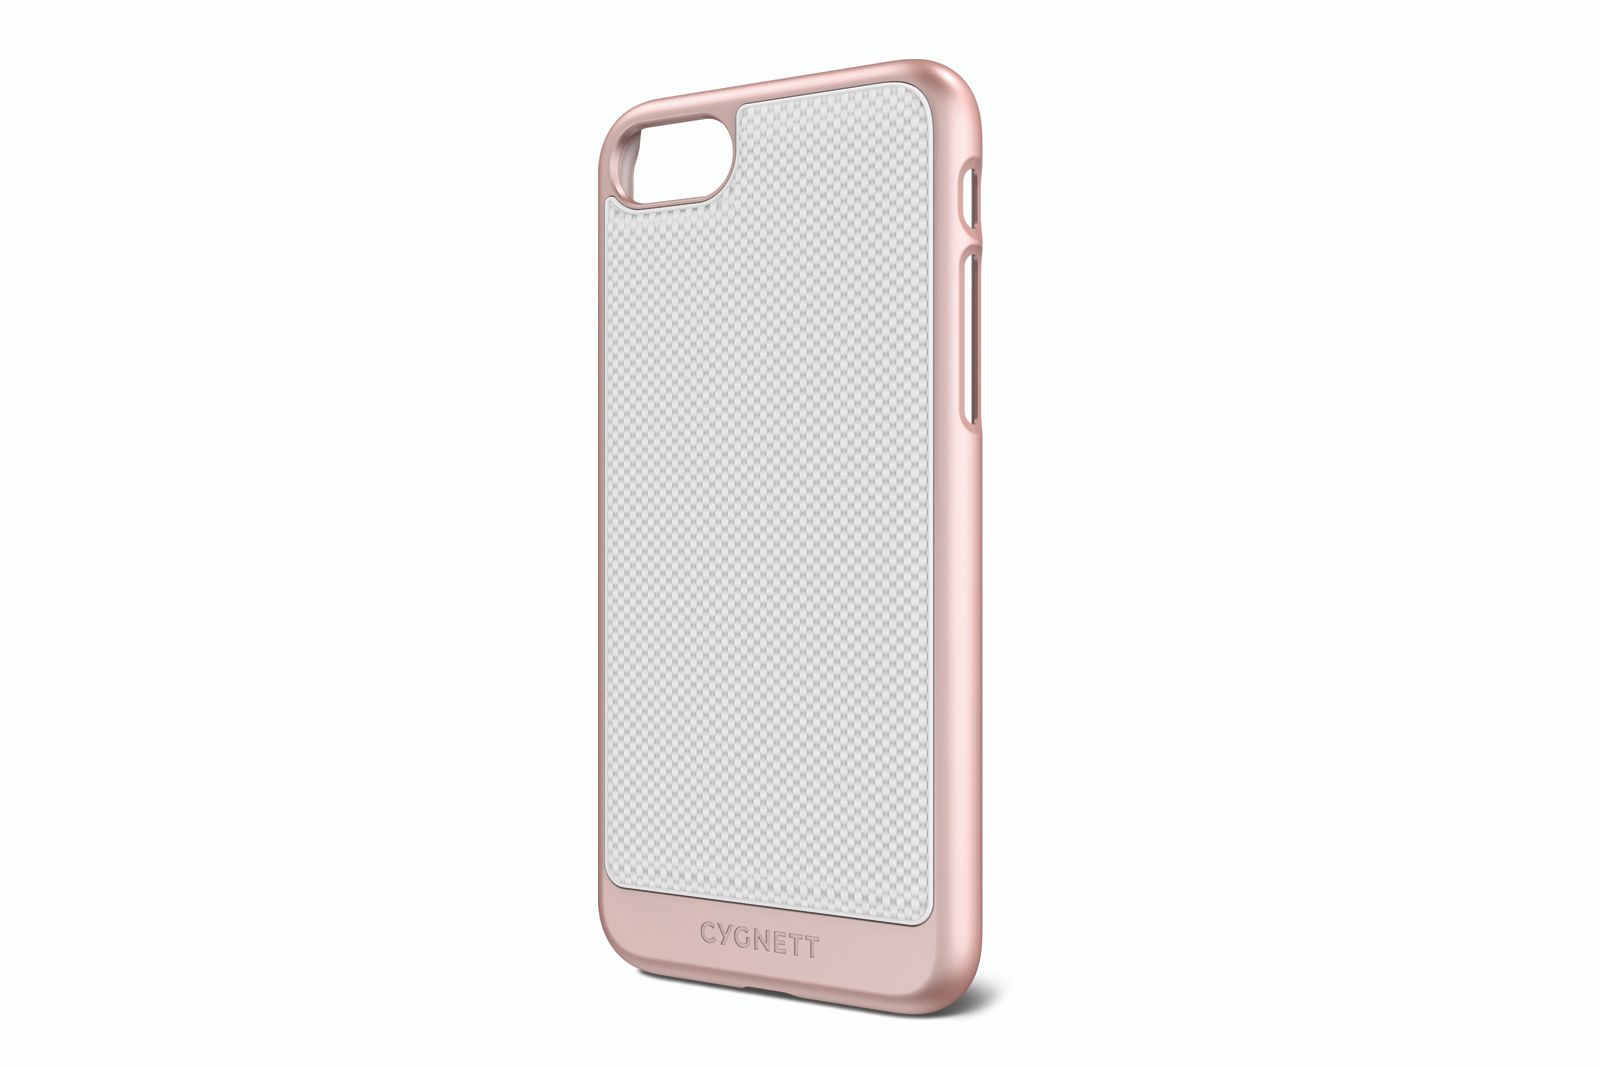 best iphone 7 and iphone 7 plus cases protect your apple device image 19